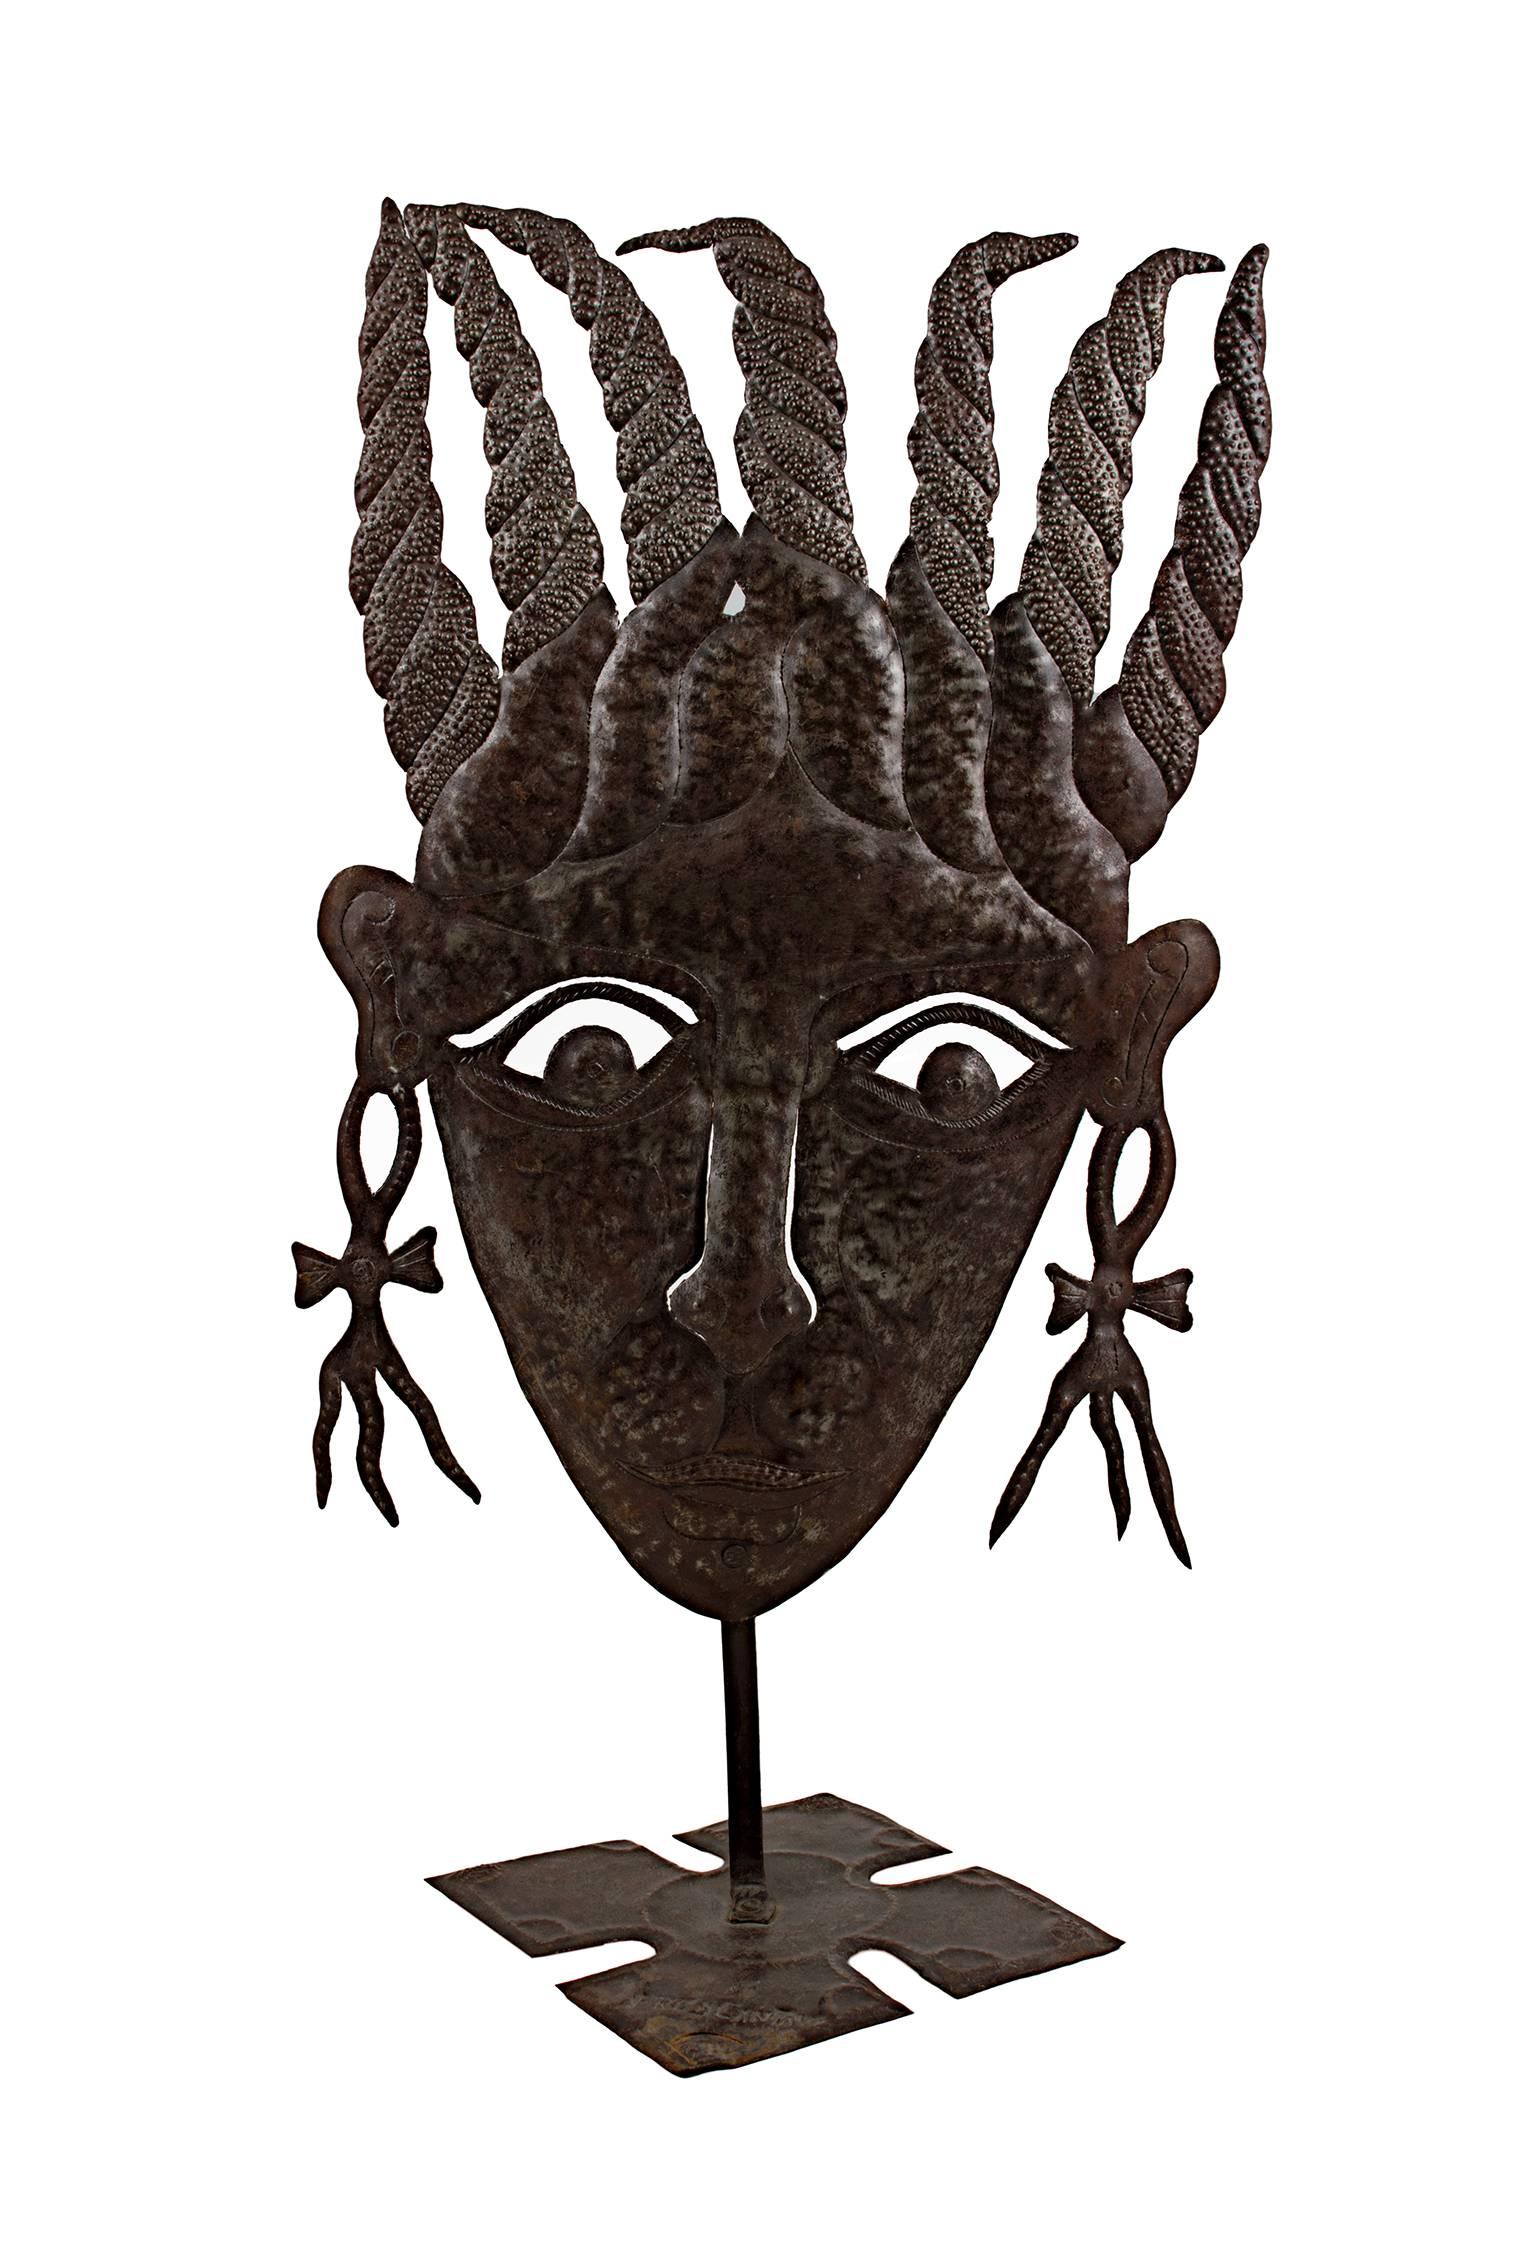 Fred Cantave Figurative Sculpture - "Head of Girl with Fancy Earrings, " Steel signed by Fred Cantava